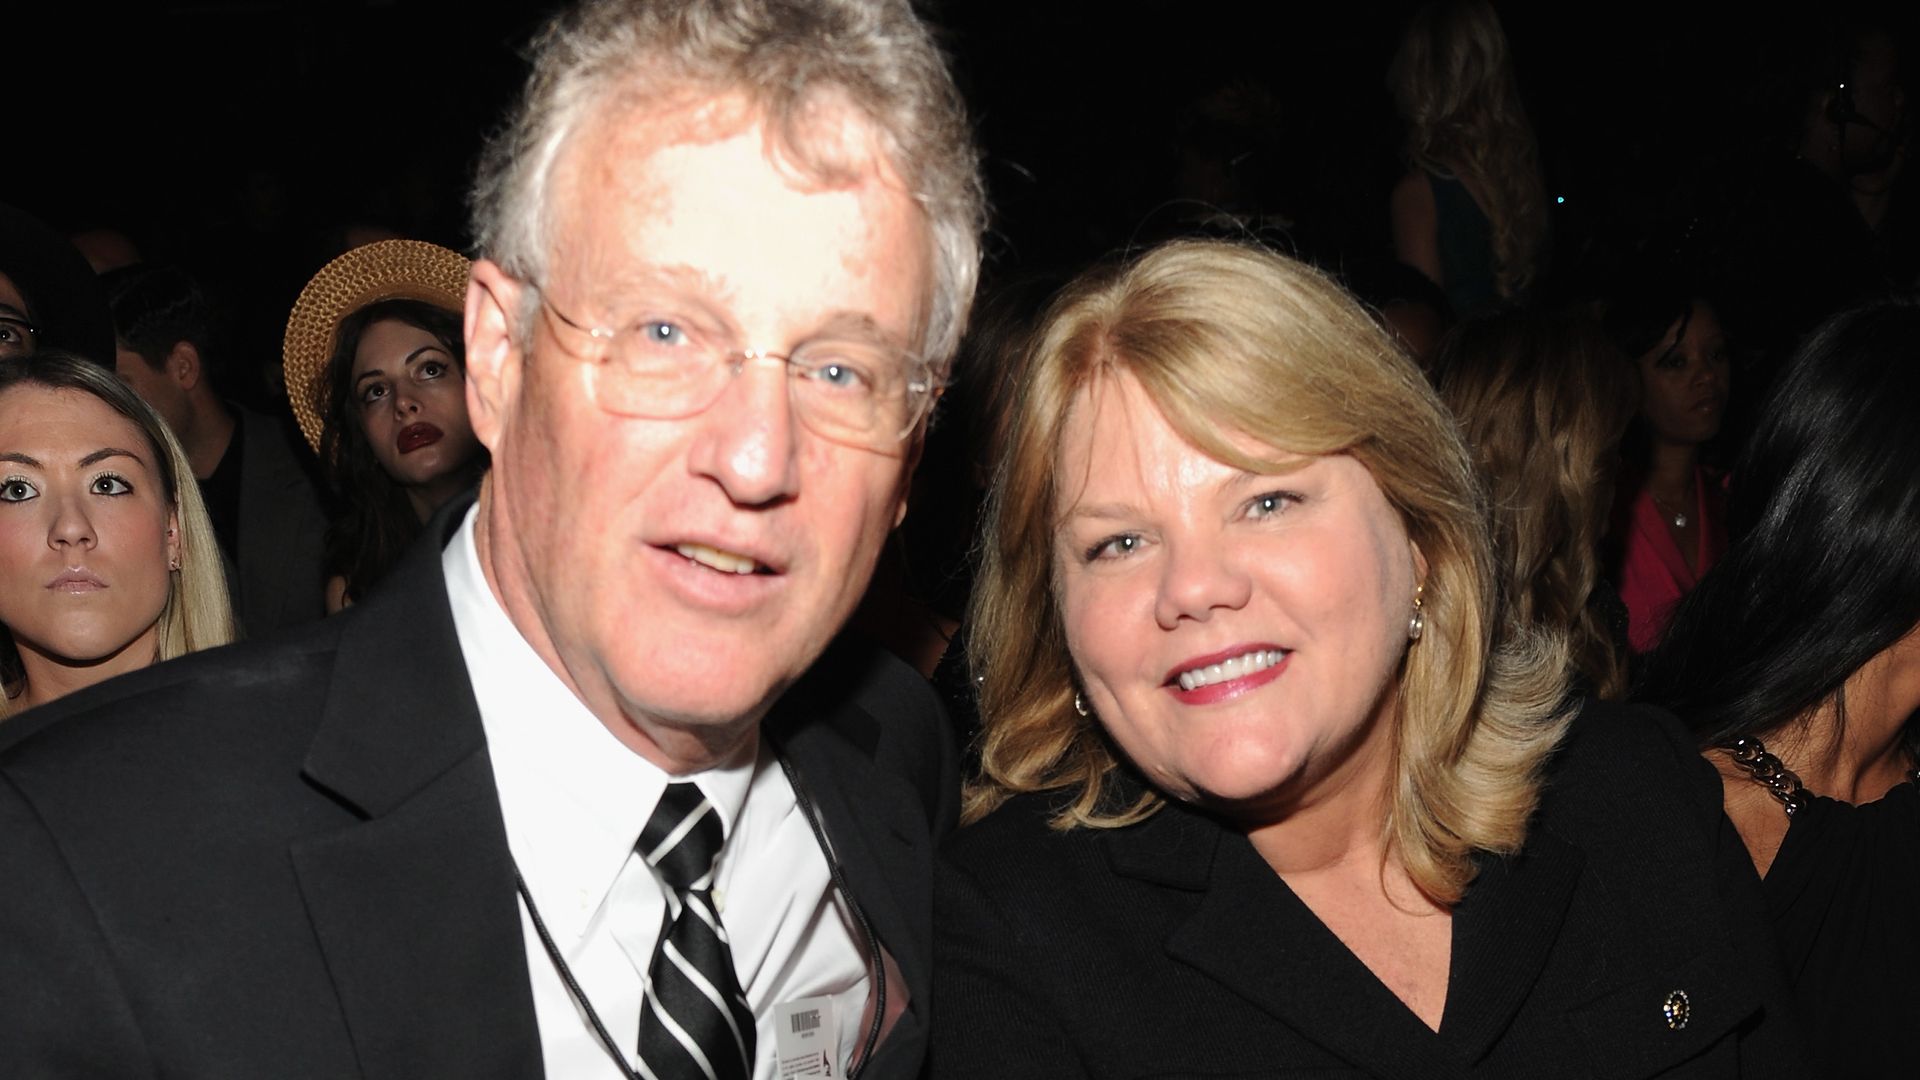 Scott and Andrea Swift in 2014